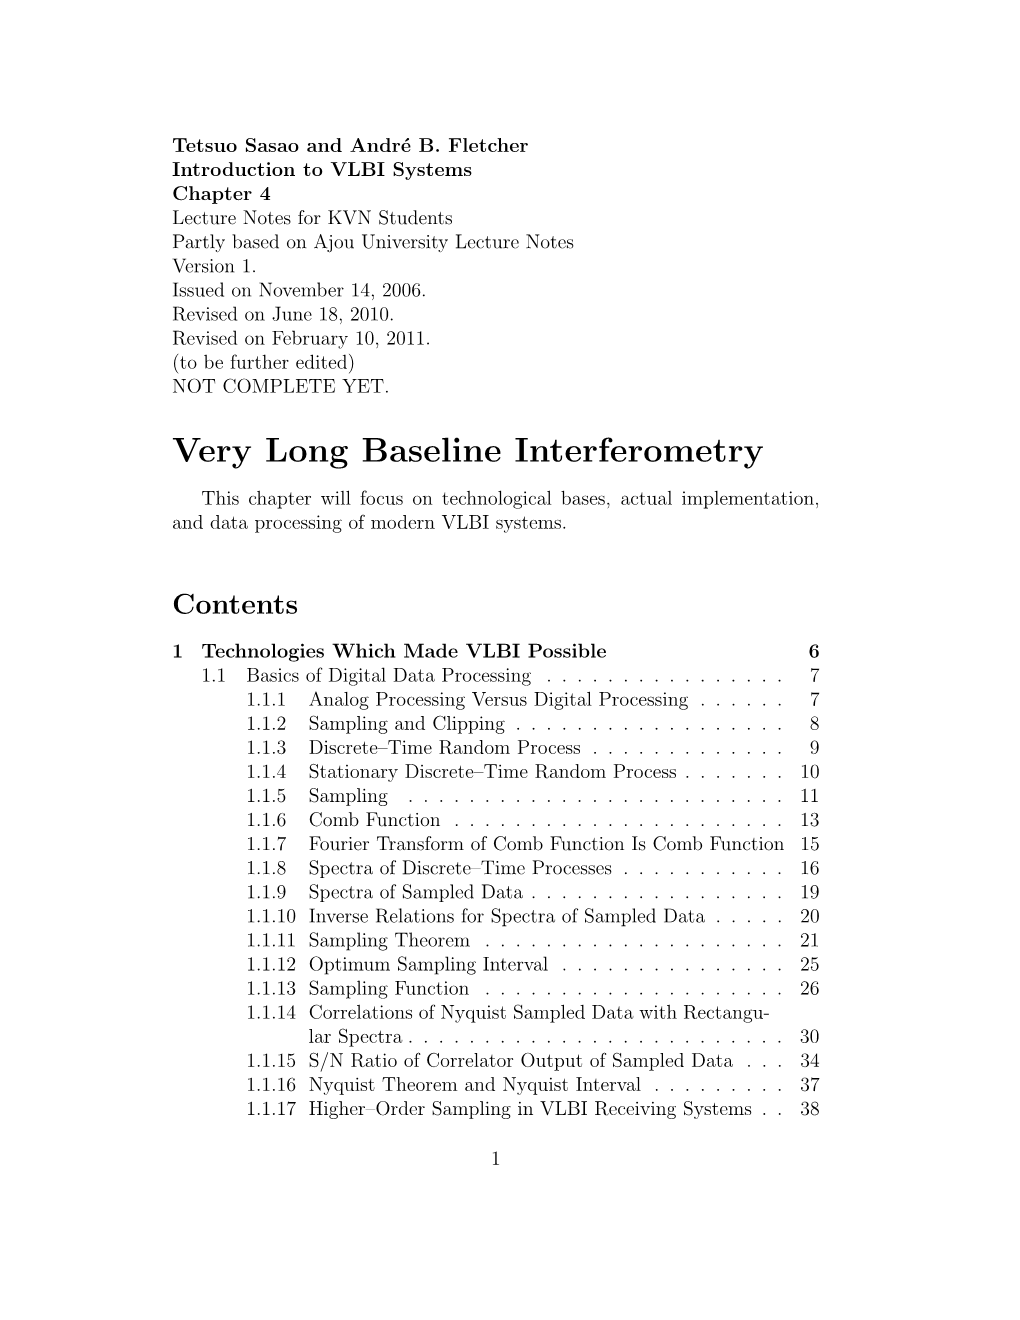 Very Long Baseline Interferometry This Chapter Will Focus on Technological Bases, Actual Implementation, and Data Processing of Modern VLBI Systems